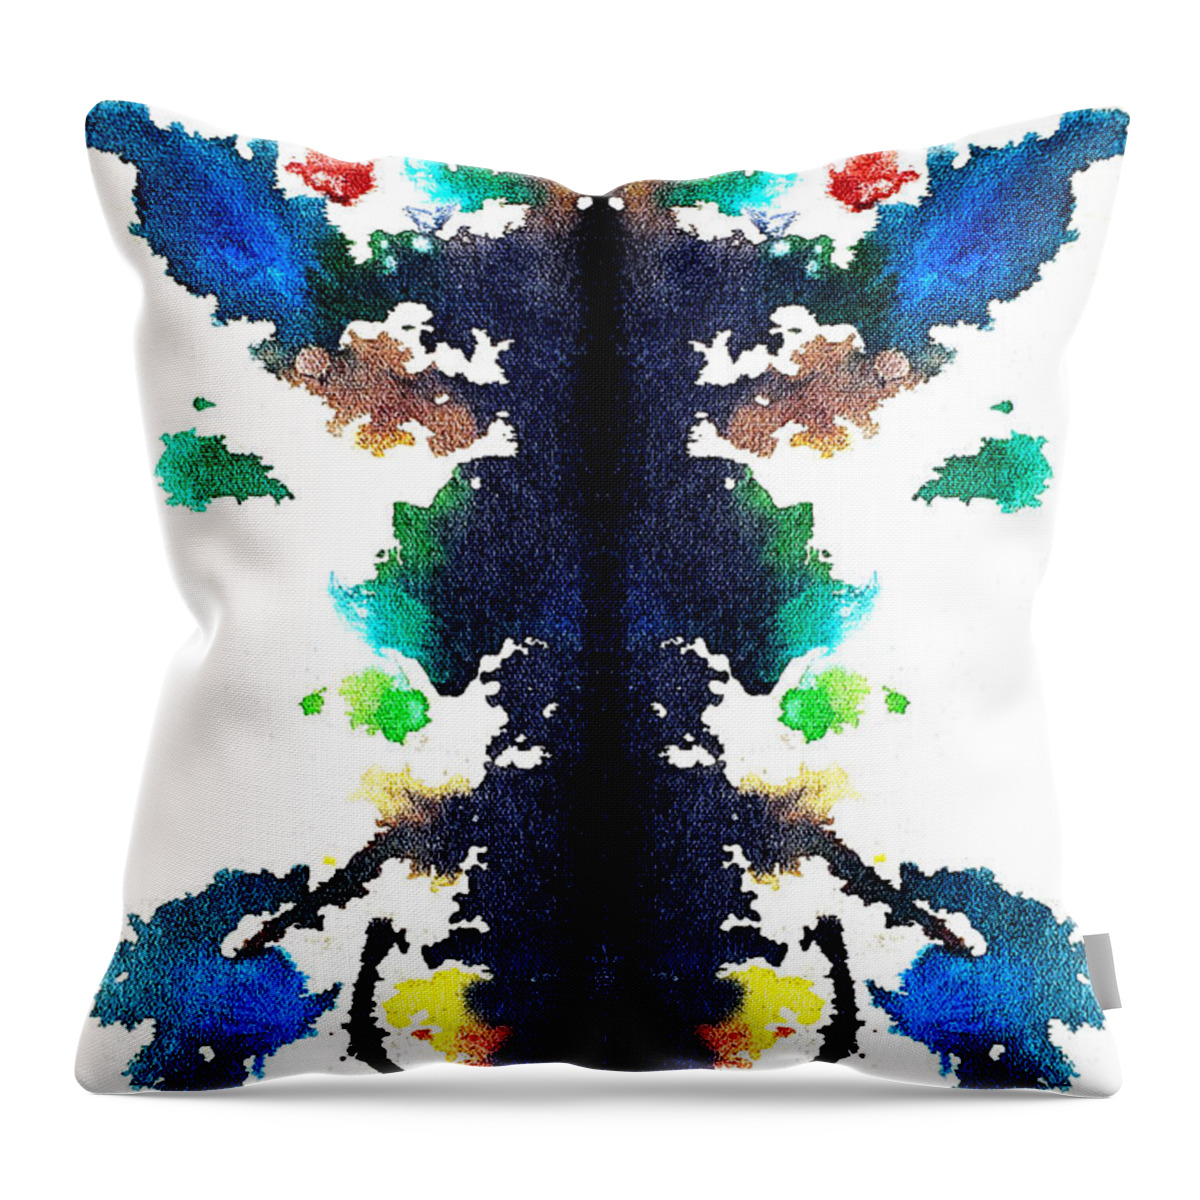 Ink Blot Throw Pillow featuring the painting Caring Celebration by Stephenie Zagorski